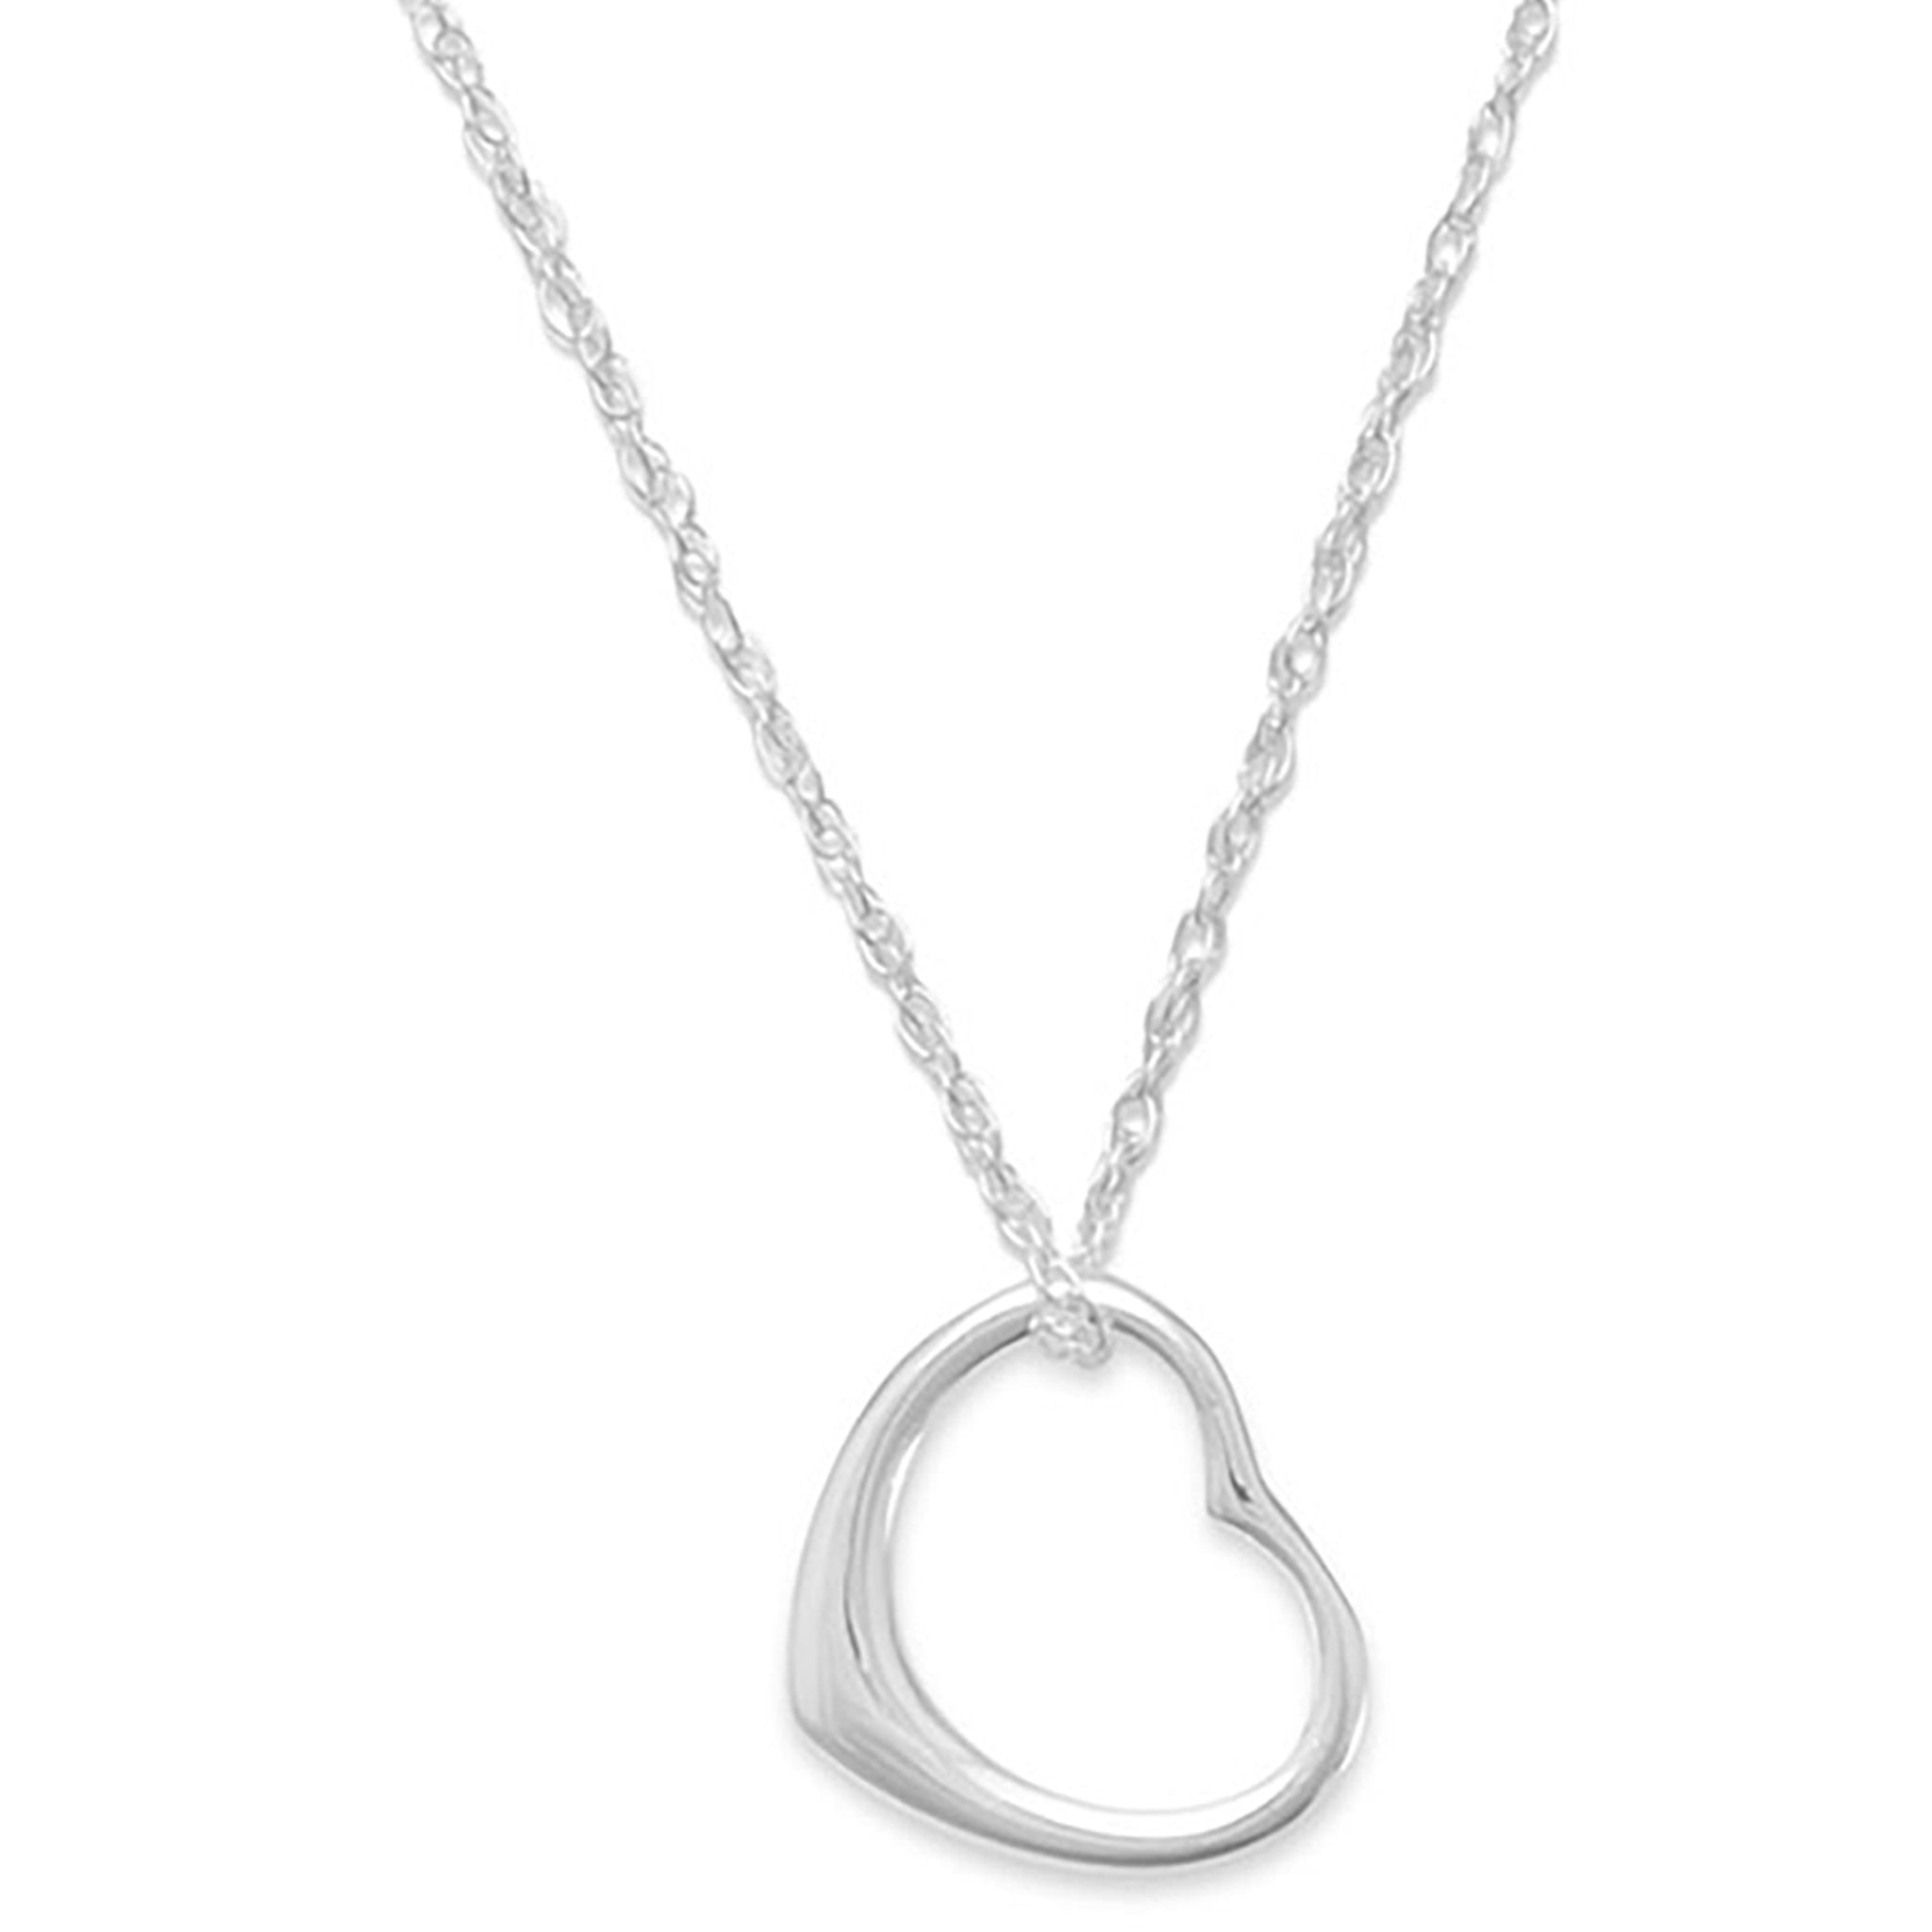 Floating Heart Pendant Necklace